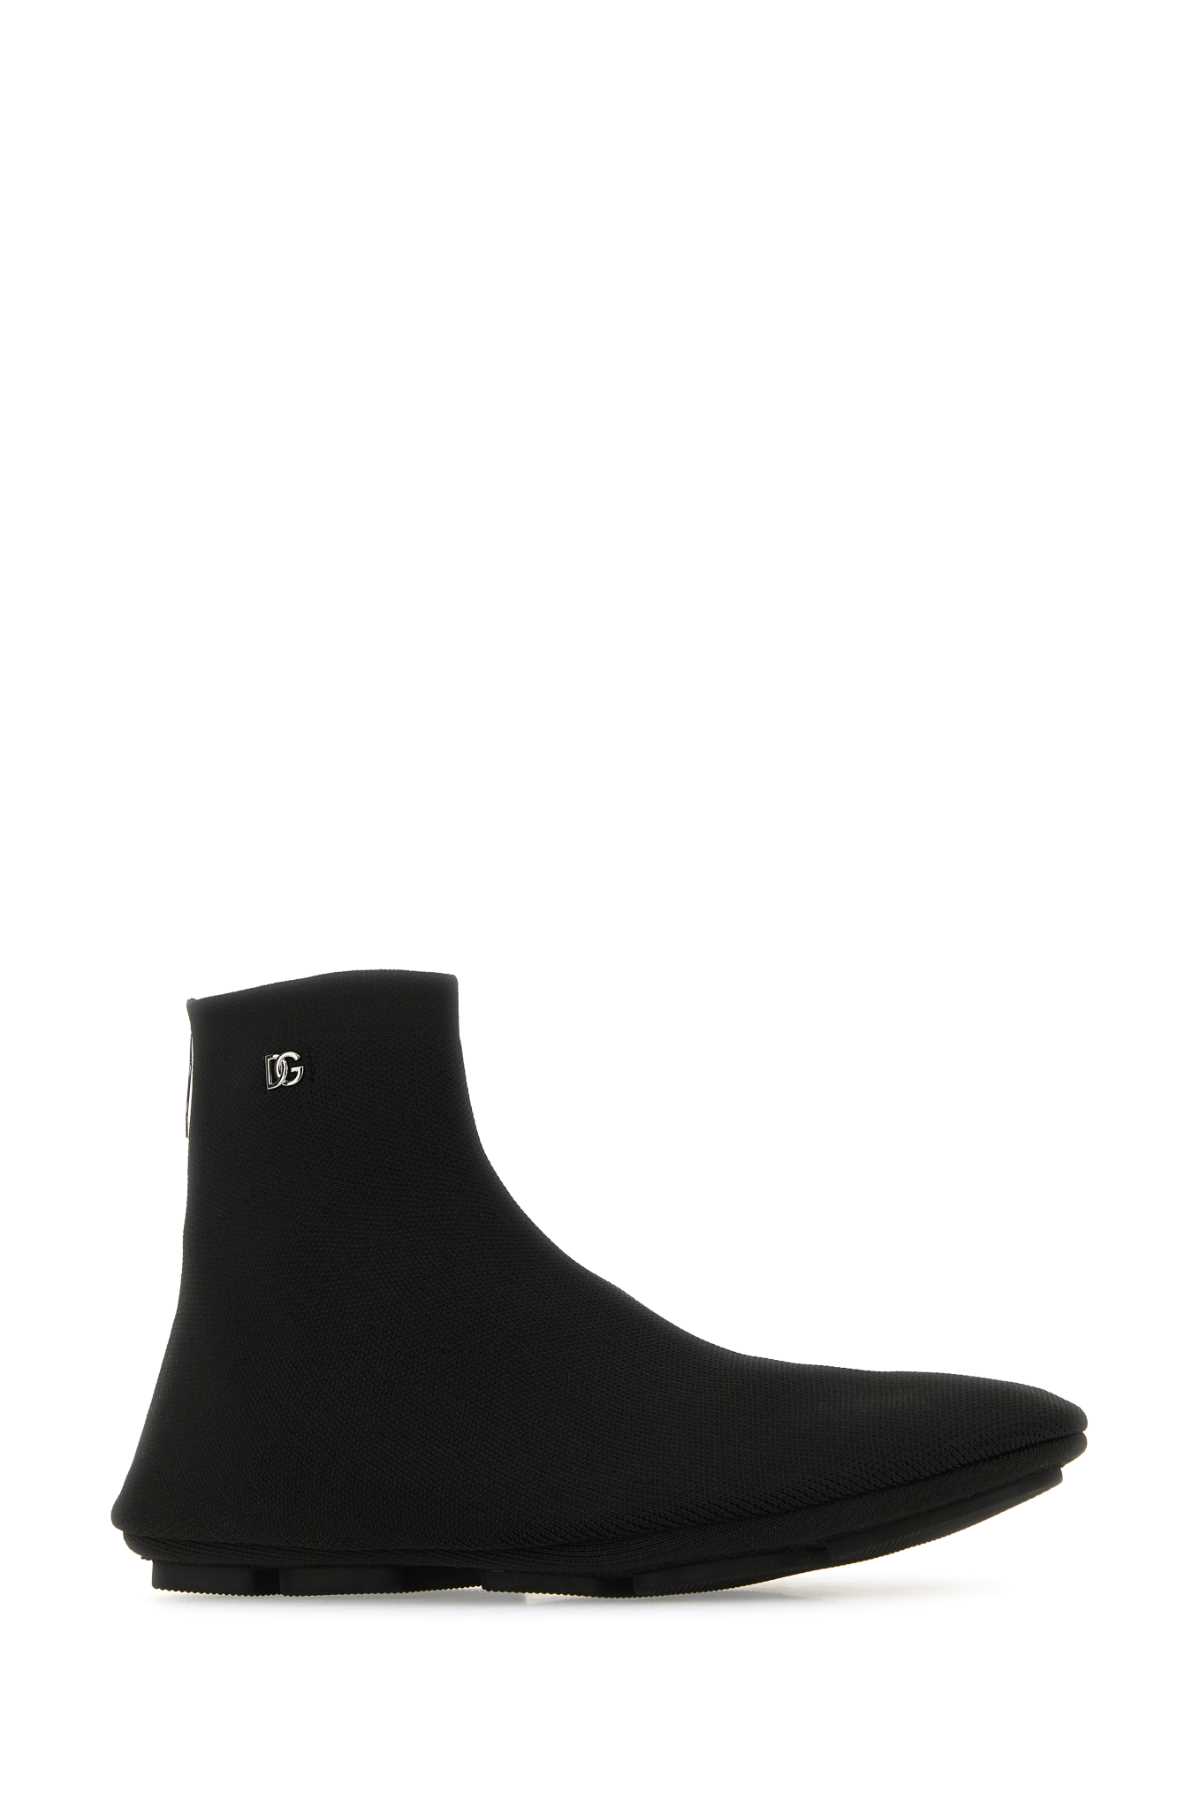 DOLCE & GABBANA BLACK FABRIC ANKLE BOOTS